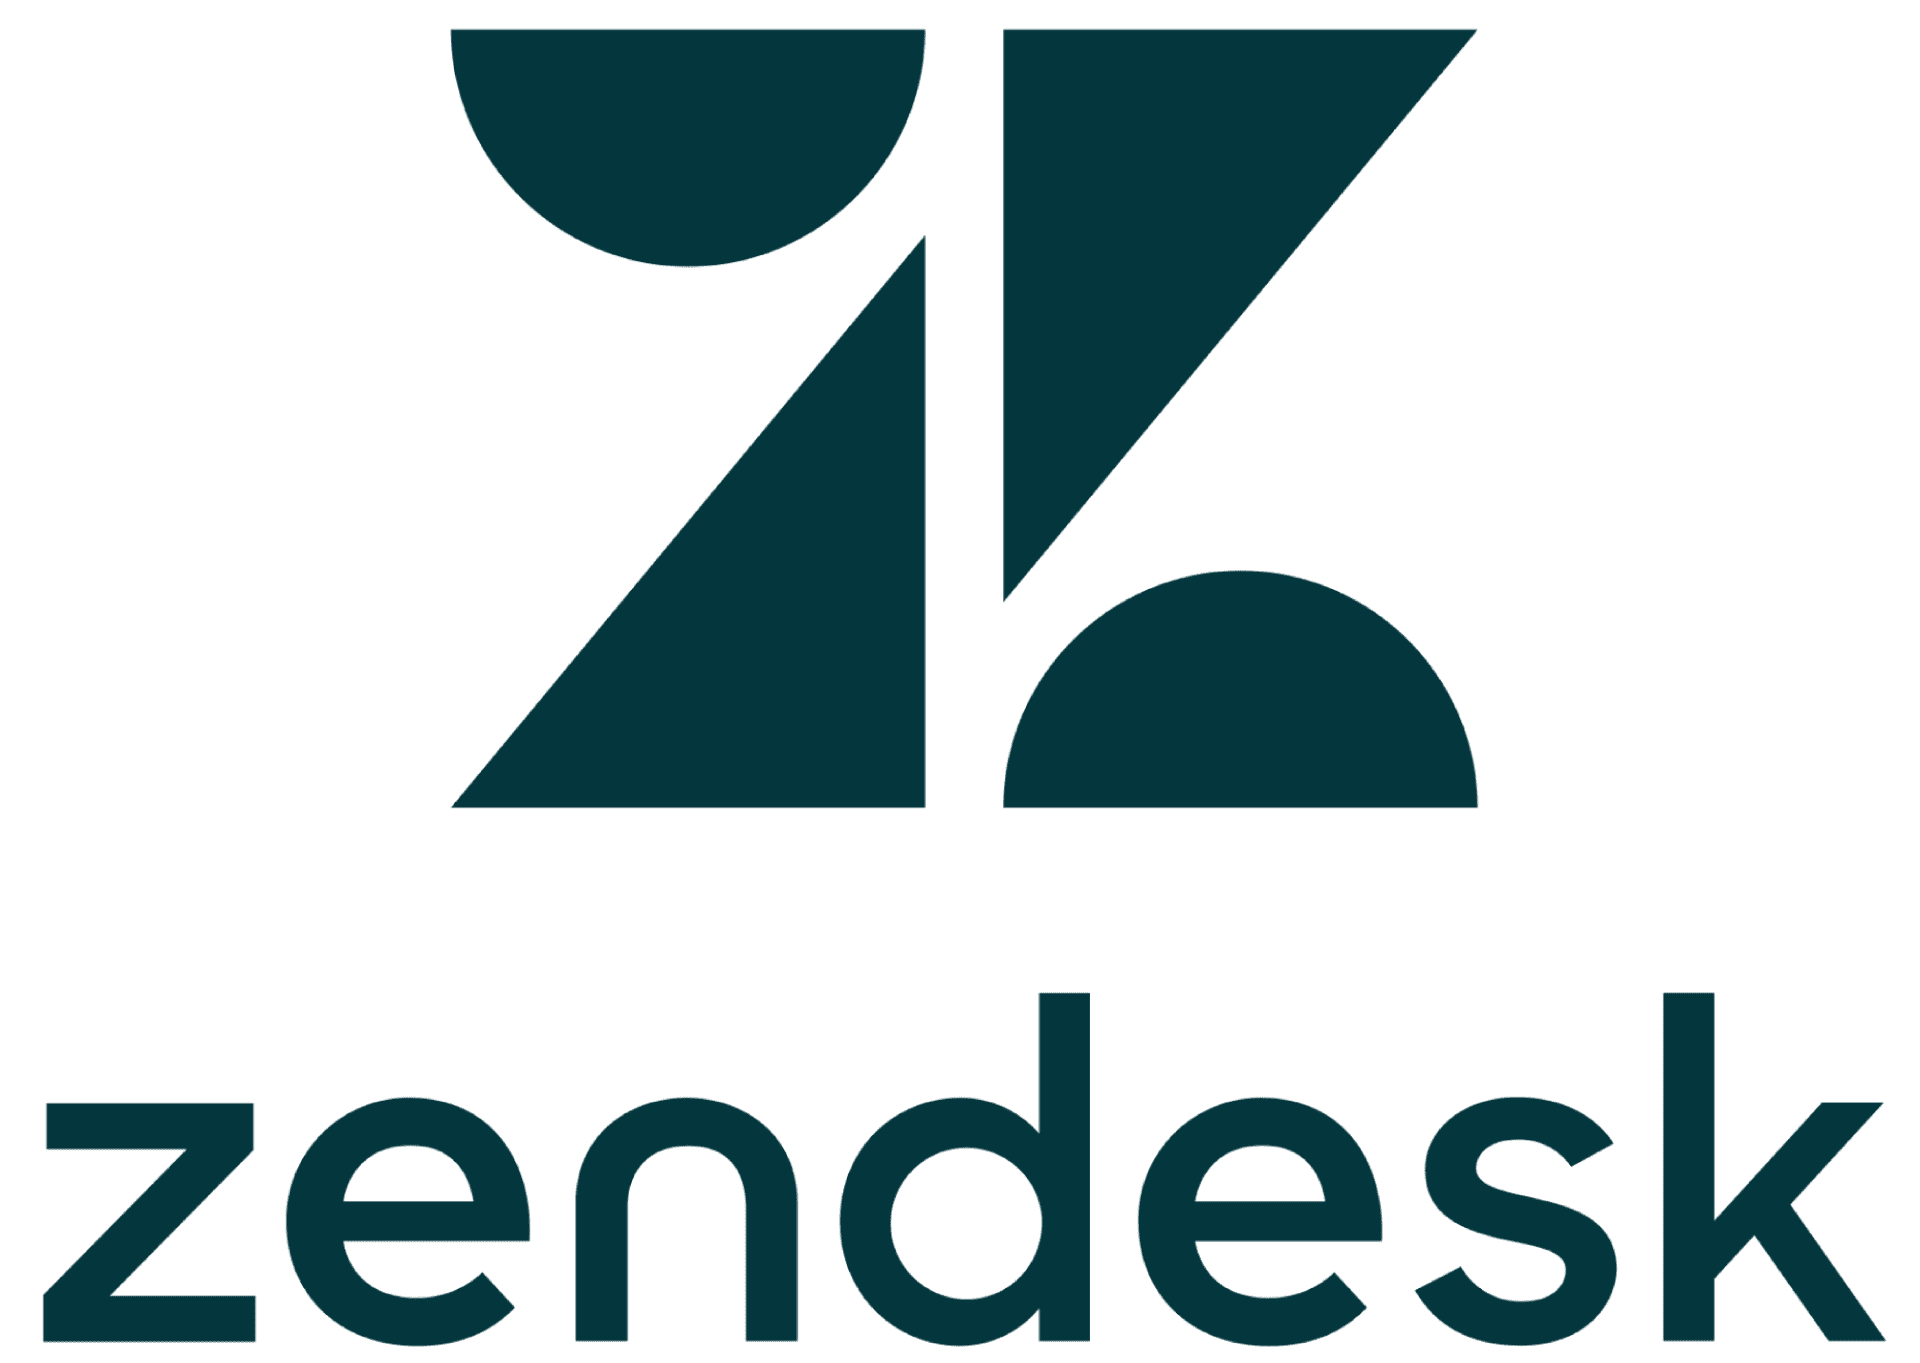 Zendesk vs Servicenow, Overview, User reviews, Asset management, Help desk software, Customer, Guides, Support, Comparison, features, Which to choose?